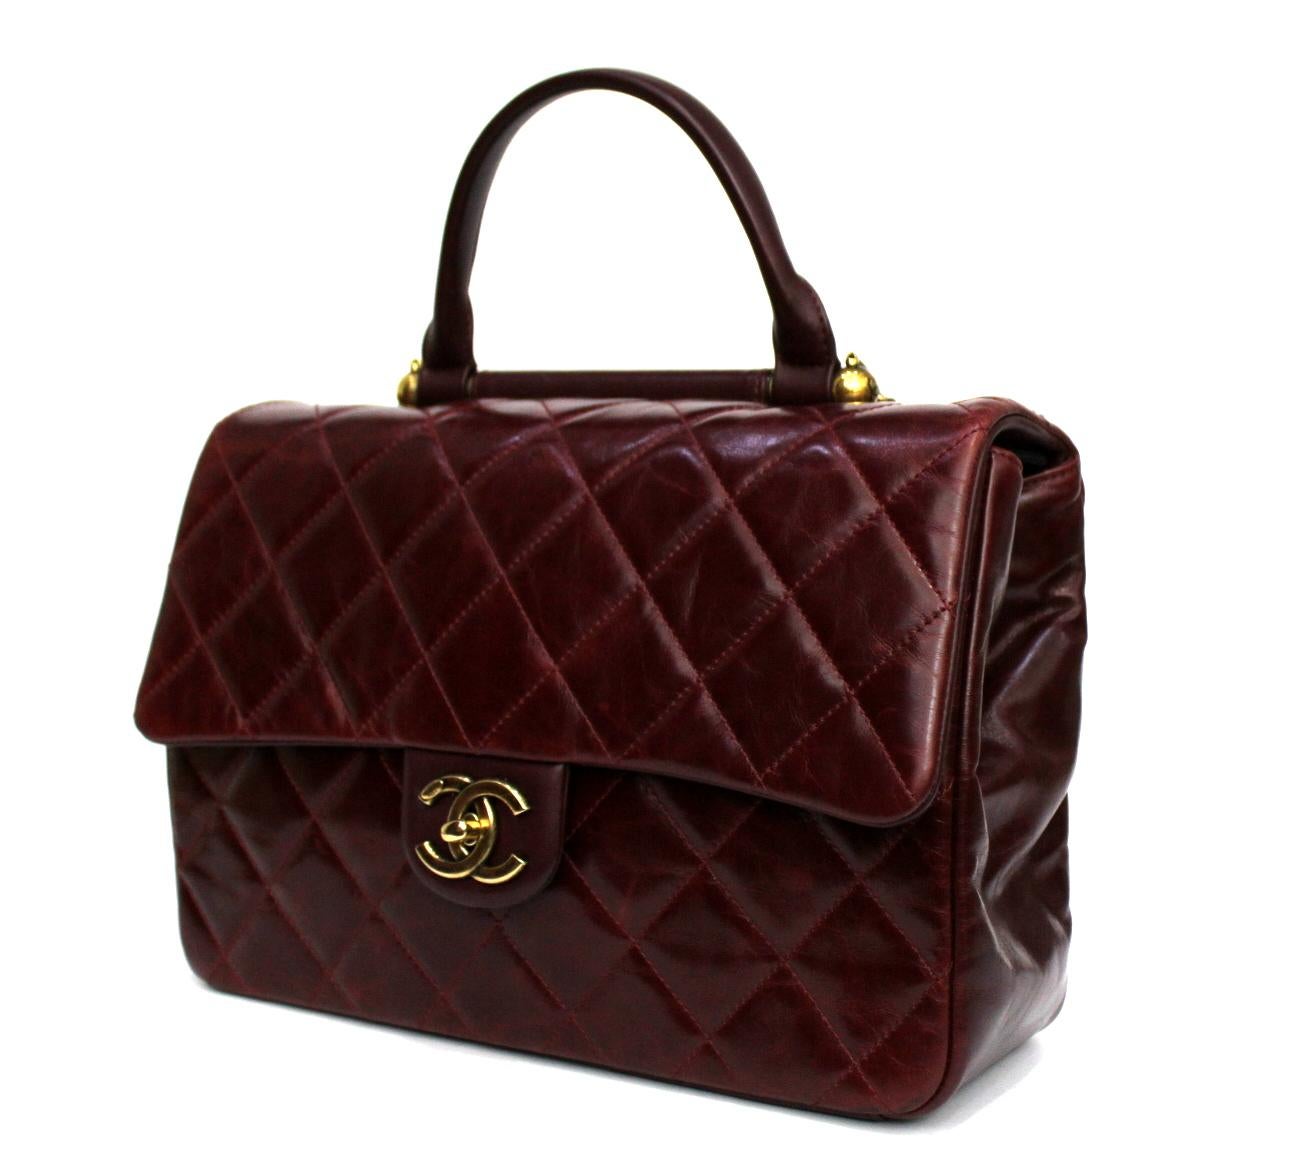 From the 2016 collection there was this beautiful bag in burgundy leather and gold aged hardware. The bag features the iconic quilting with a single top handle and a chunky chain shoulder strap. It can be carried in a variety of ways, by hand, on